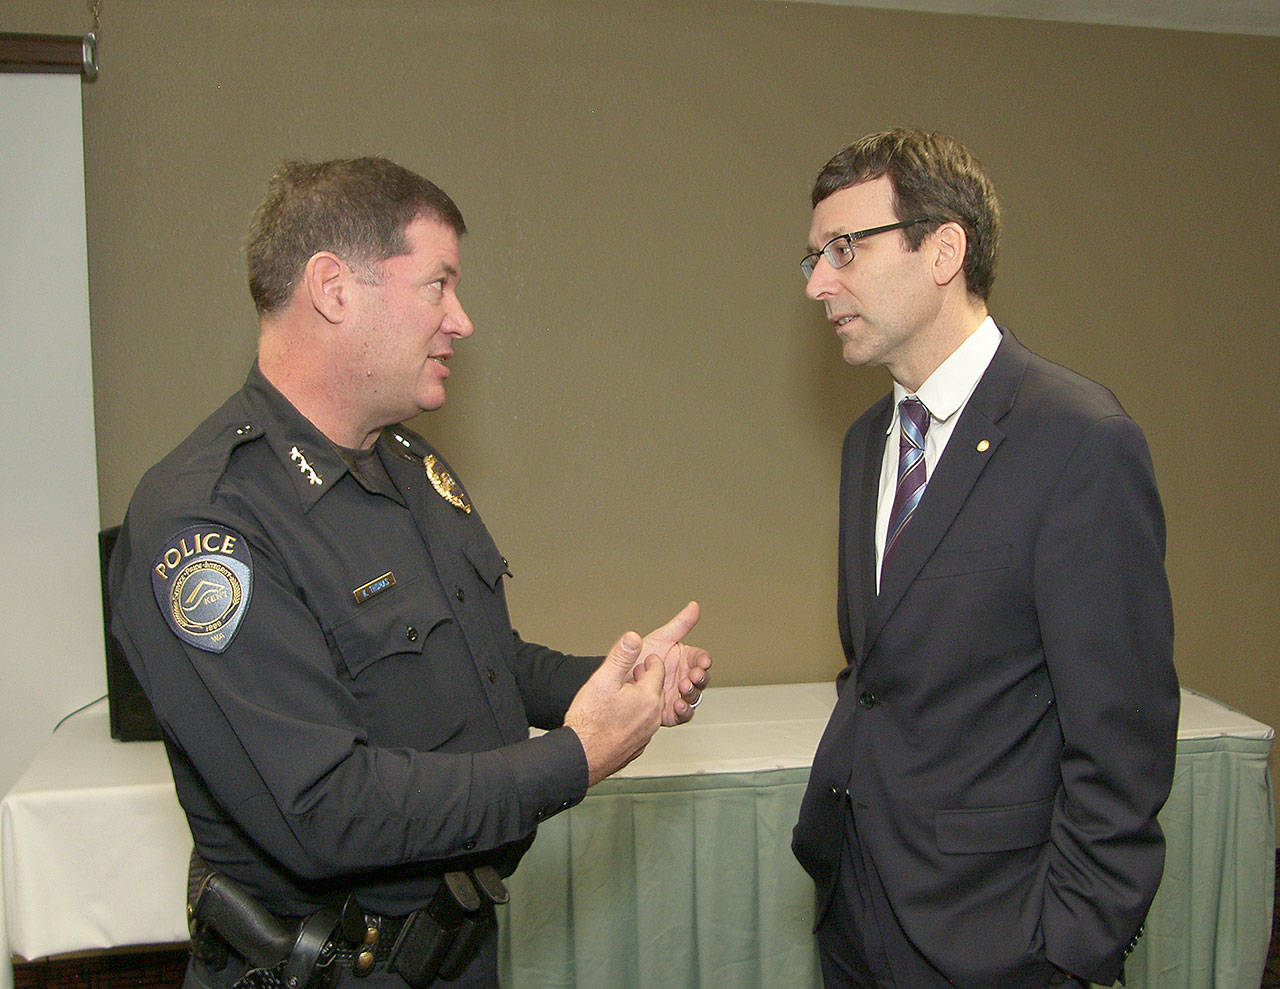 State Attorney General Bob Ferguson, right, chats with Kent Police Chief Ken Thomas during his visit to Kent on Tuesday. COURTESY PHOTO, Don Dinsmore